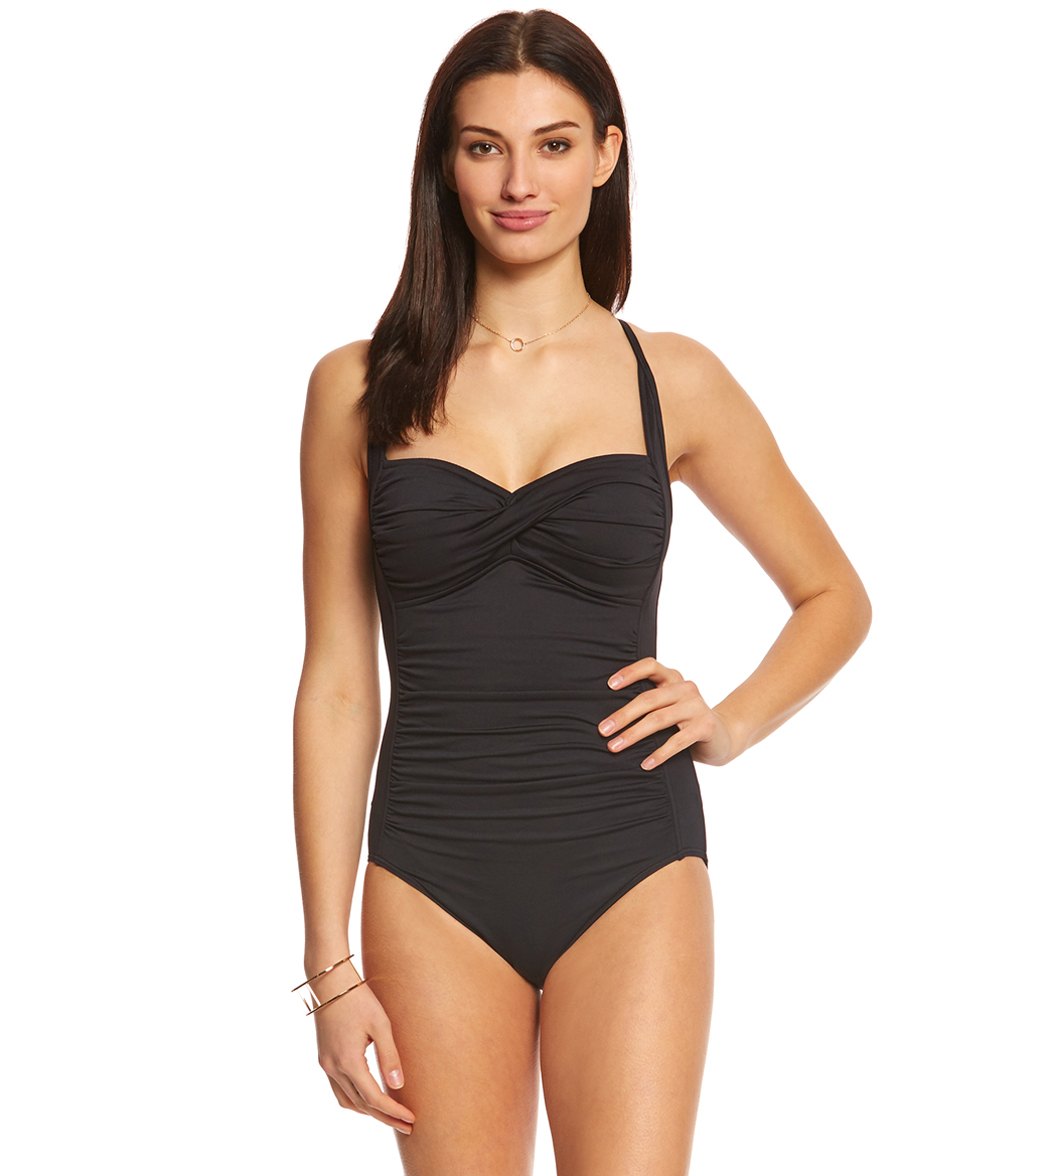 Seafolly Twist Halter Maillot One Piece Swimsuit - Black 4 - Swimoutlet.com